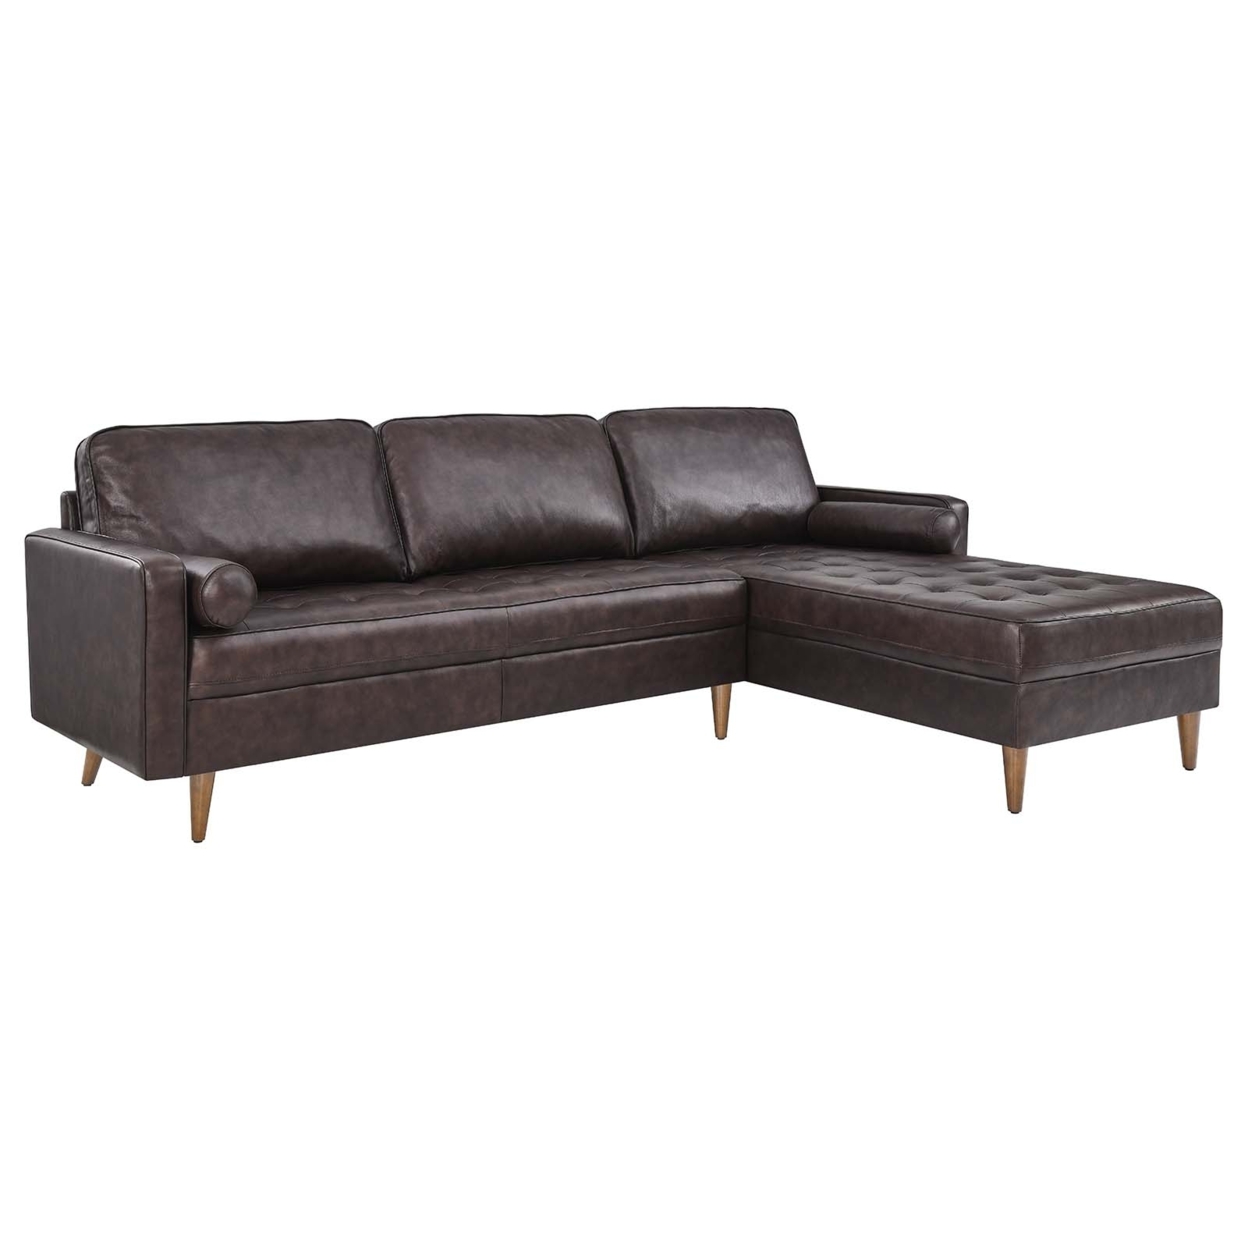 Valour 98 Leather Sectional Sofa, Brown